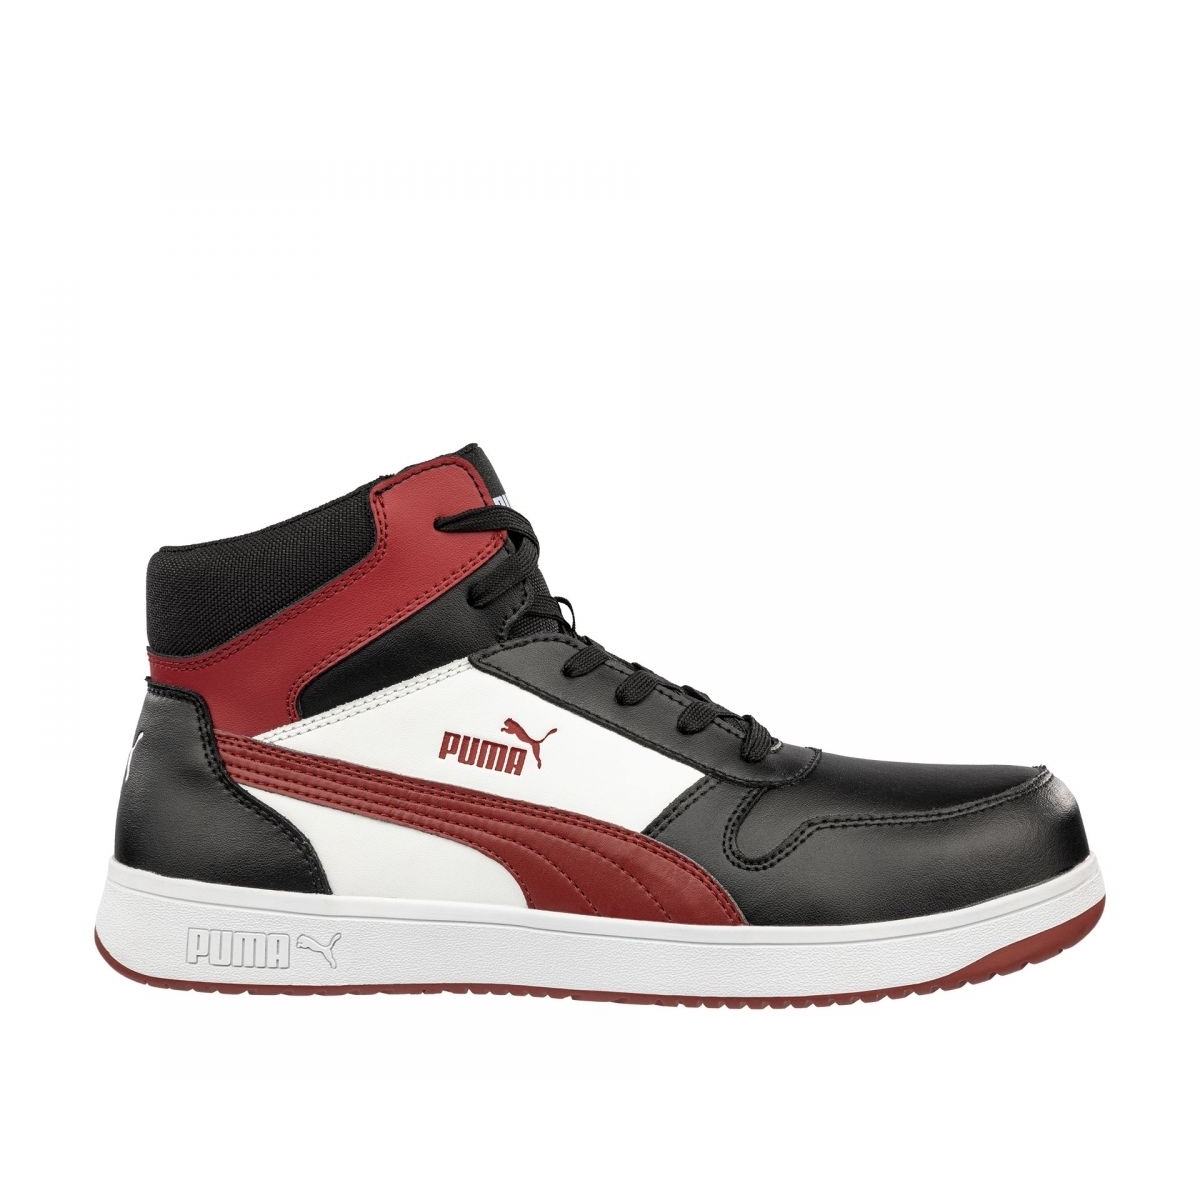 PUMA Safety Men's Frontcourt Mid Composite Toe Waterproof Work Boot Black/White/Red - 630055 BLK/ WHT/RED - BLK/ WHT/RED, 11.5